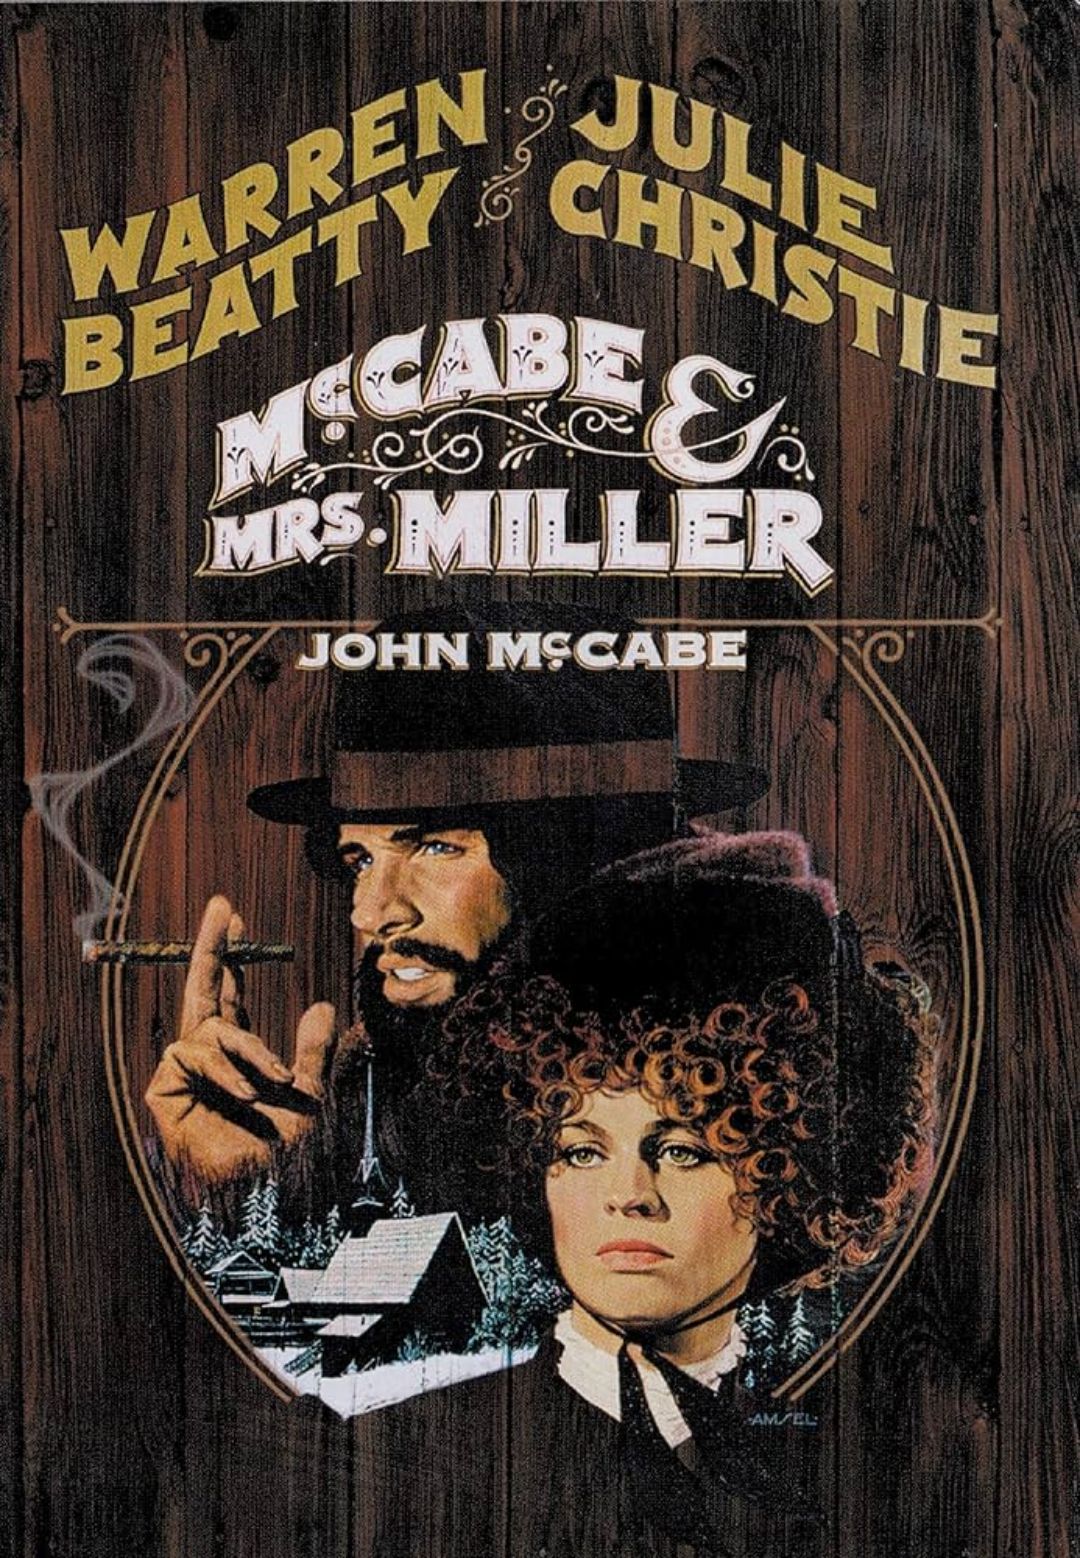 McCabe and Mrs Miller poster